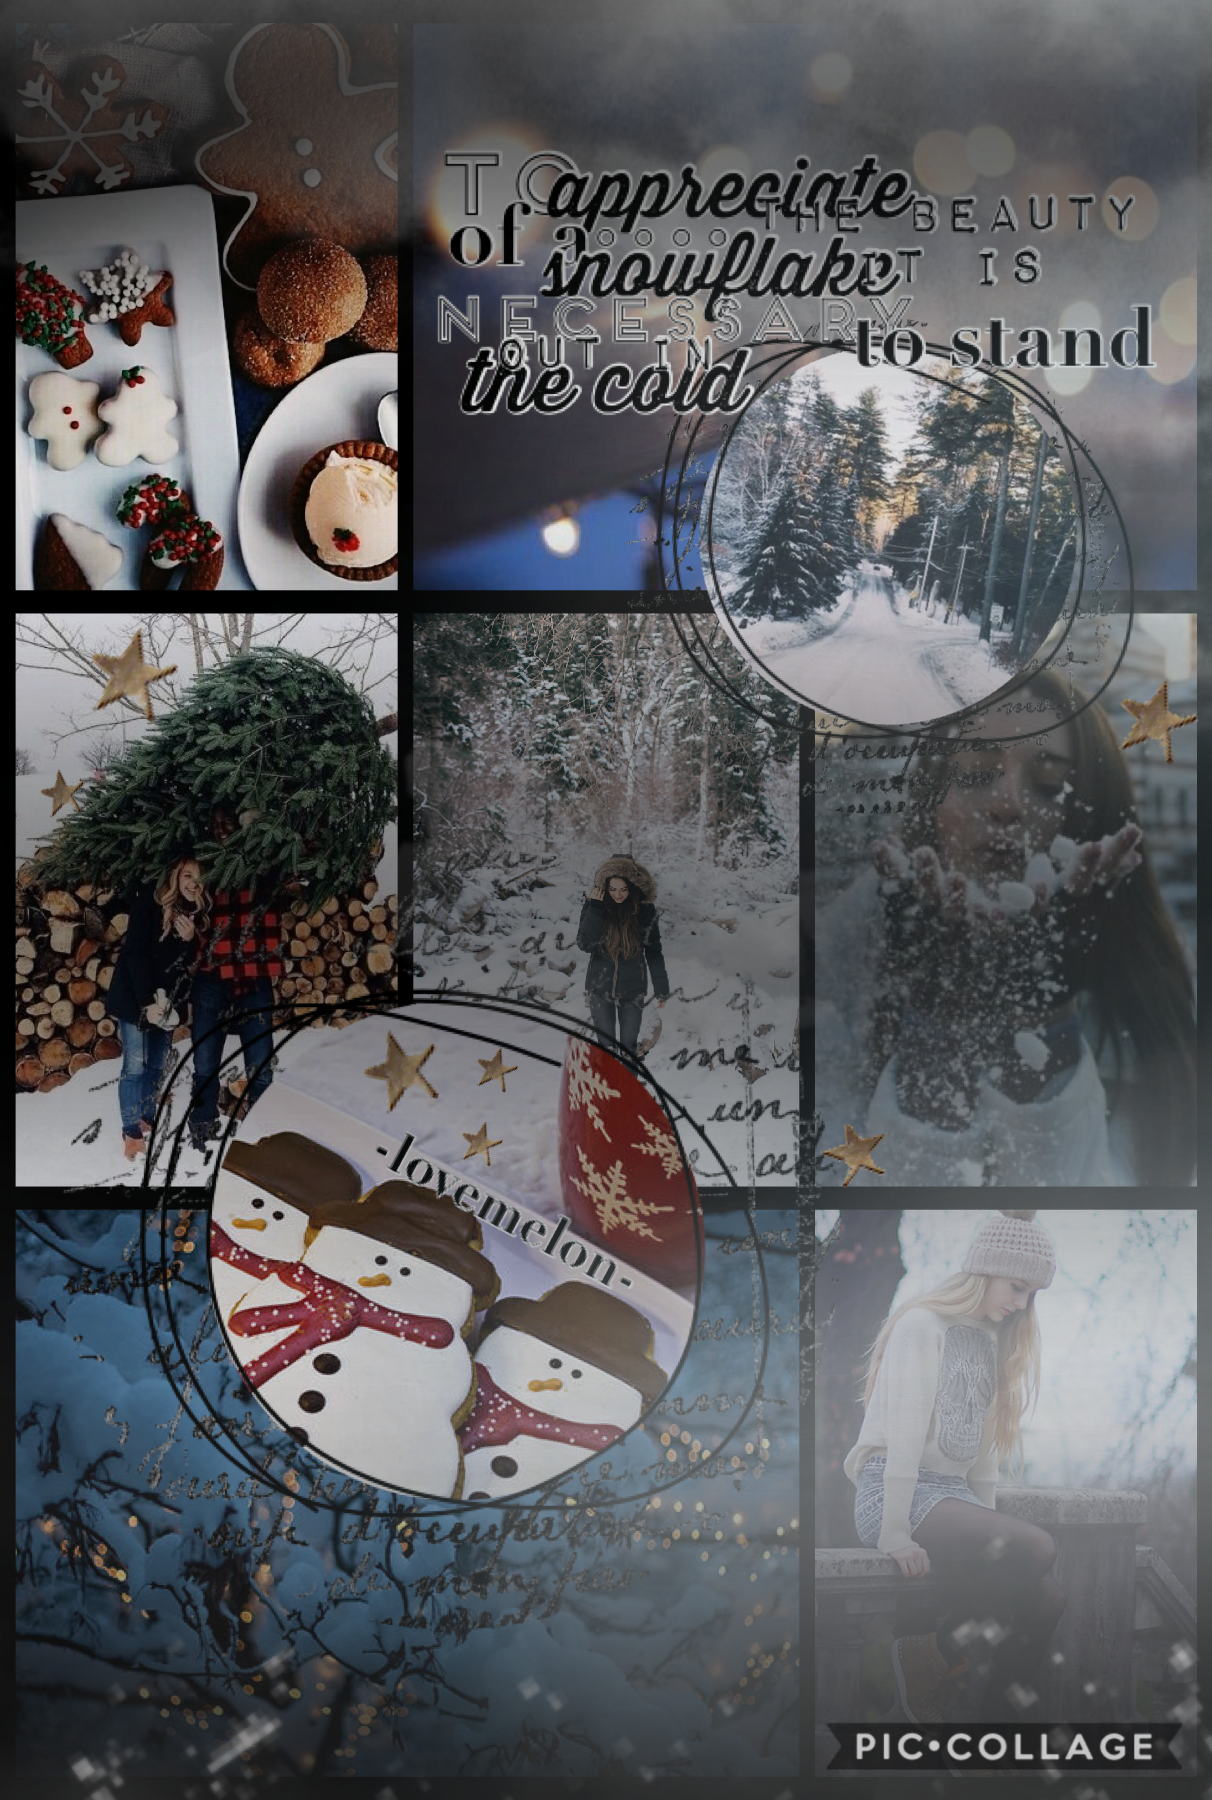 ✰✰✰tap✰✰✰

my first winter collage!! i hope you enjoy!! ❄️🌨🌫

i’m not really sticking with a style, just doing random things.

-lovemelon❤️🍉-